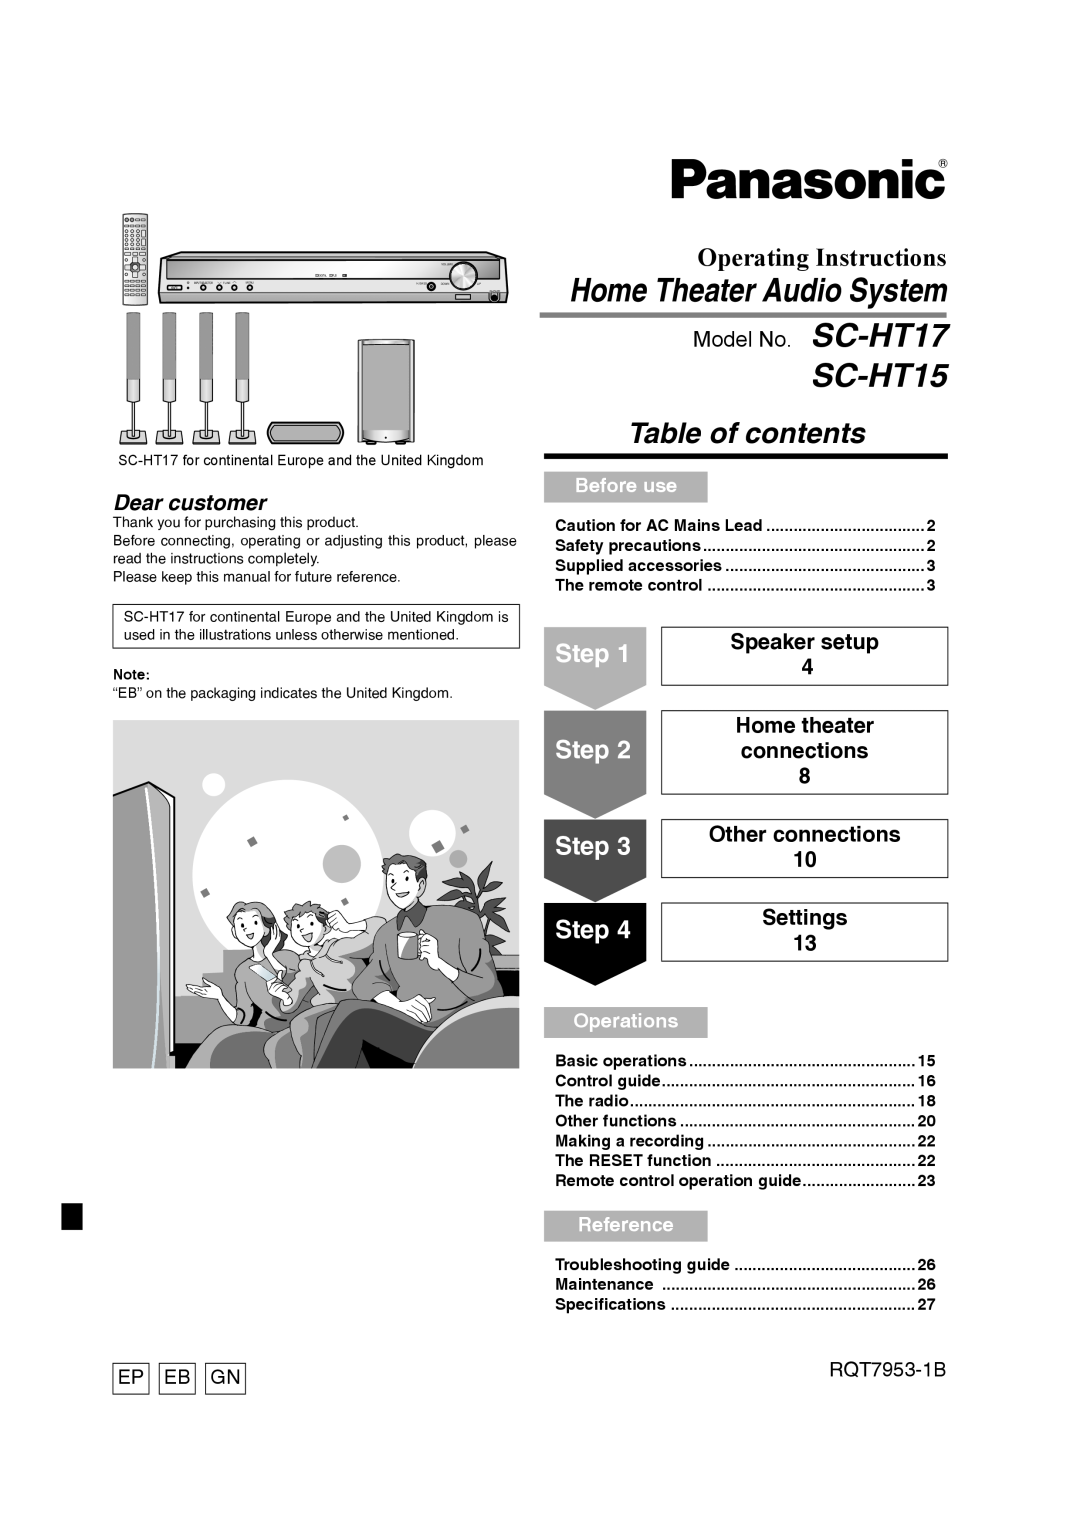 Panasonic operating instructions Model No. SC-HT17, Home theater, Other connections, Settings, Before use, Operations 